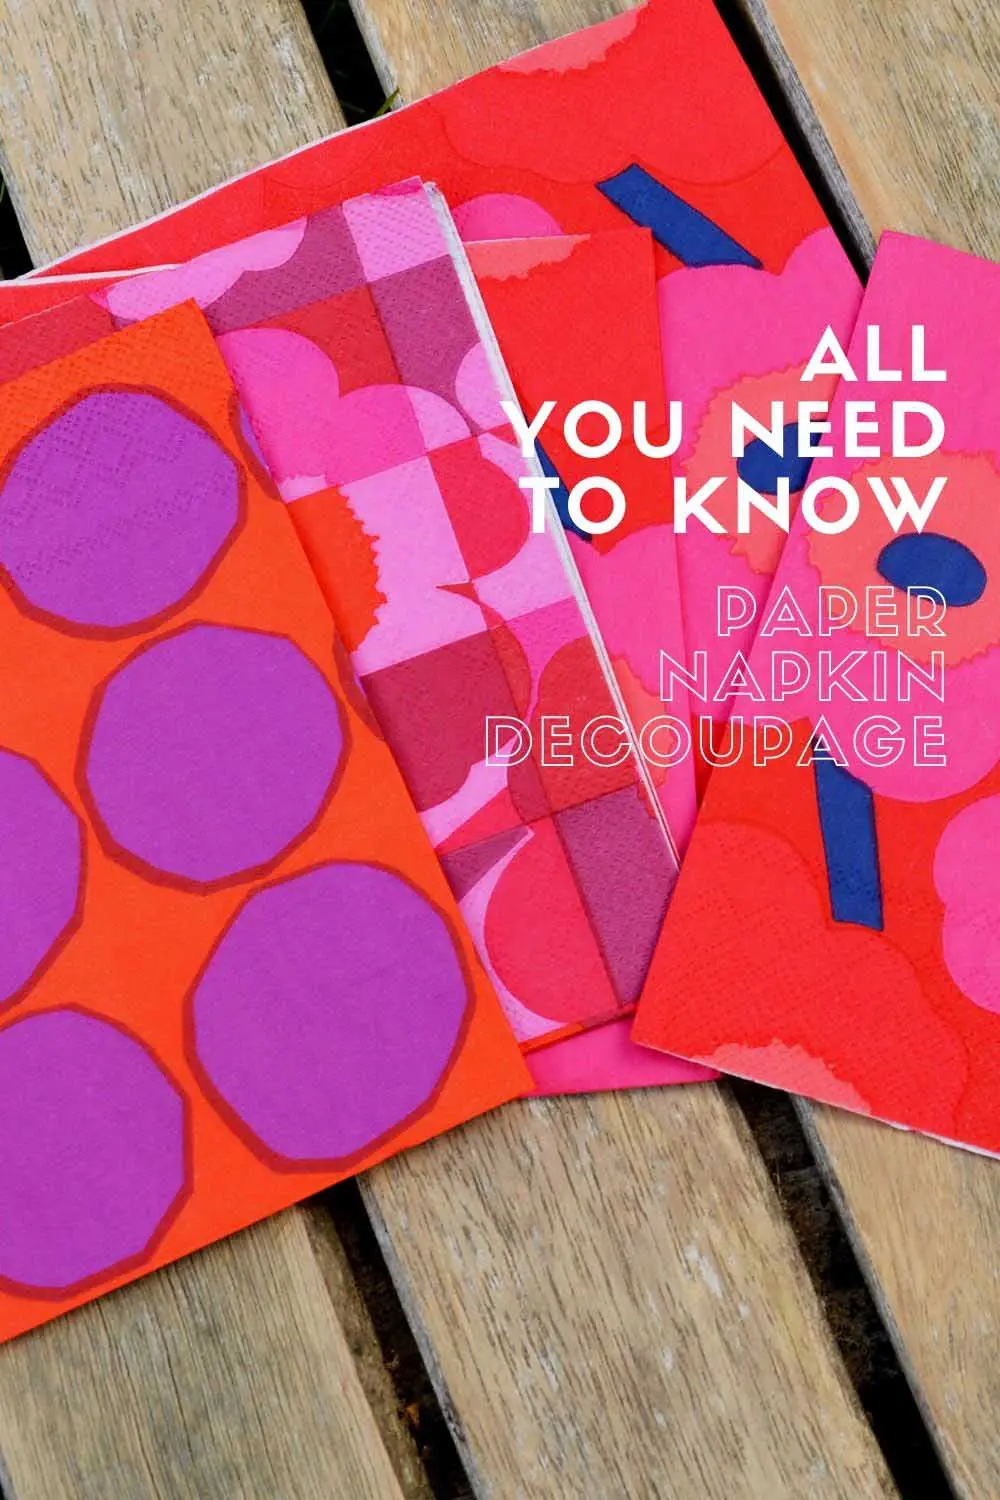 14 WAYS TO USE DECOUPAGE NAPKINS! TIPS & TRICKS! PROJECTS UNDER $5